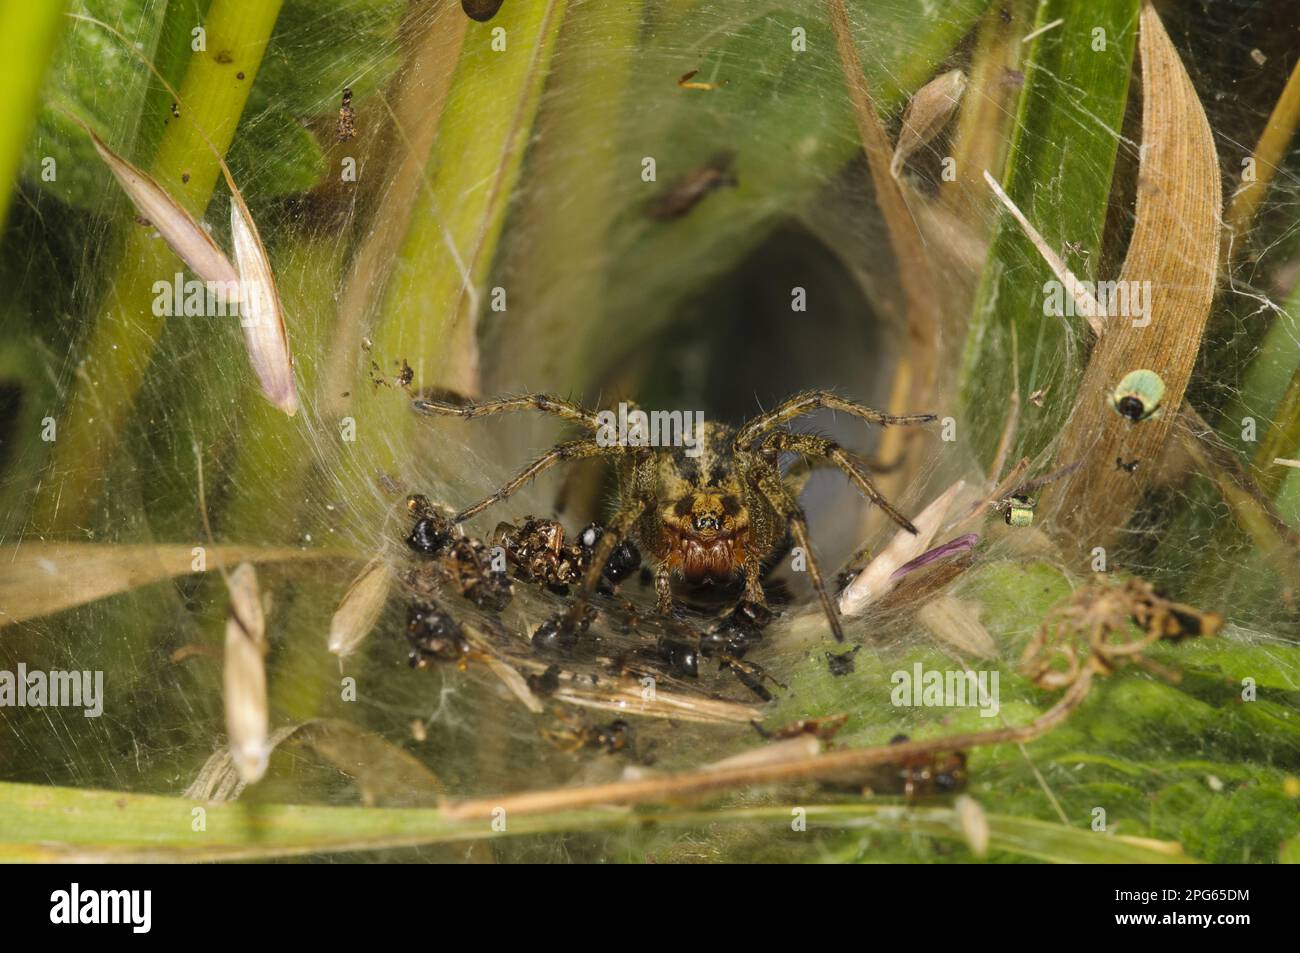 Adult common labyrinth spider (Agelena labyrinthica) surrounded by remains of recent meals, in a tunnel web, Crossness Nature Reserve, Bexley, Kent Stock Photo